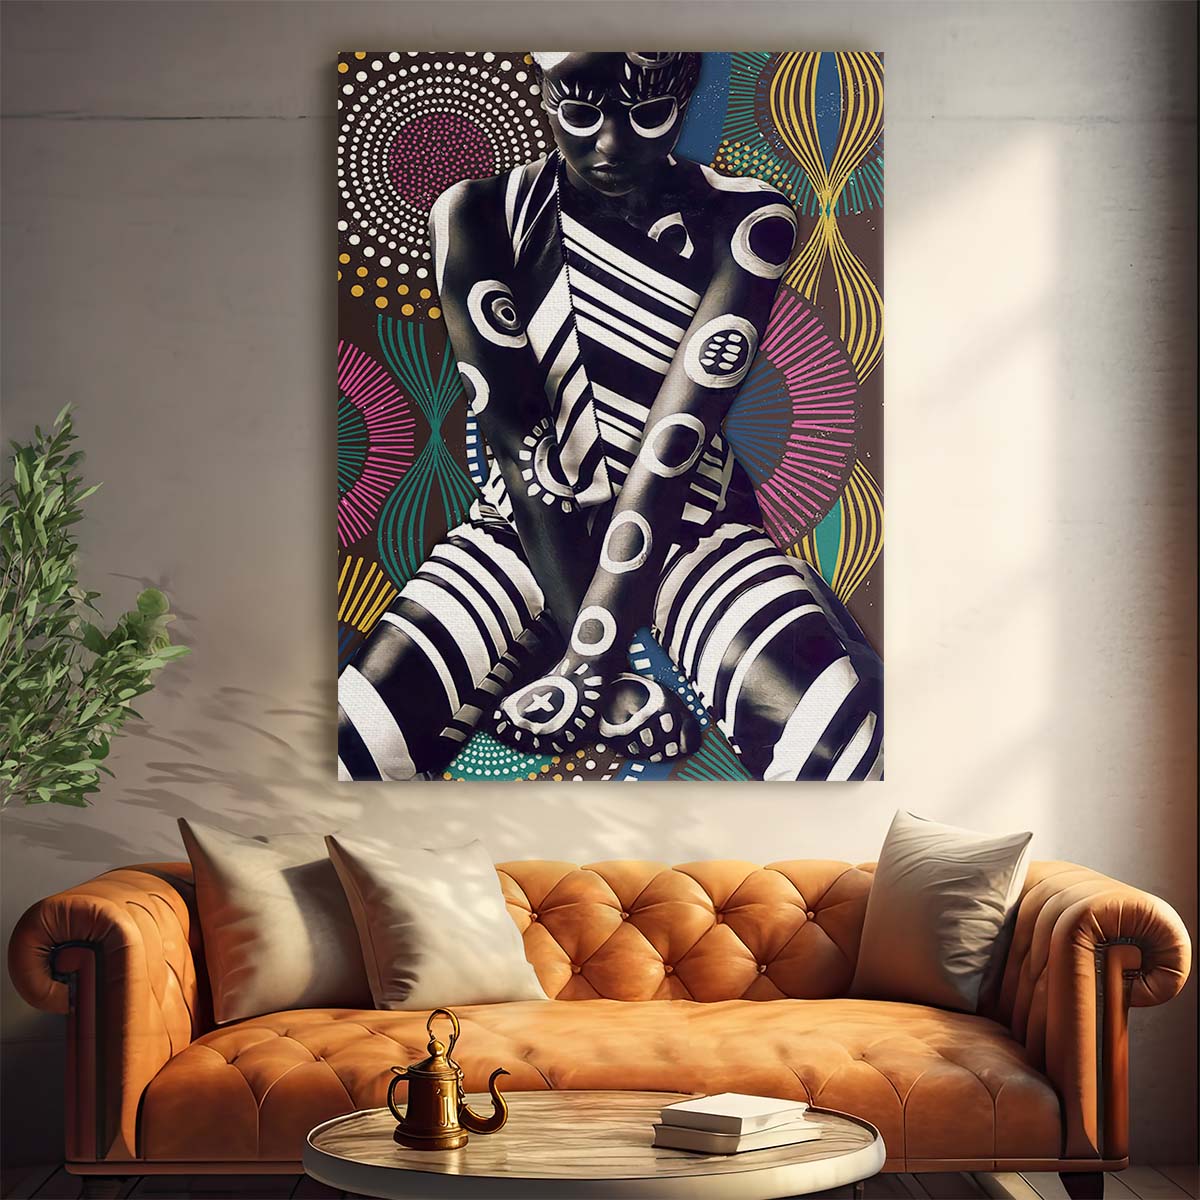 Black African Woman Culture Wall Art by Luxuriance Designs. Made in USA.